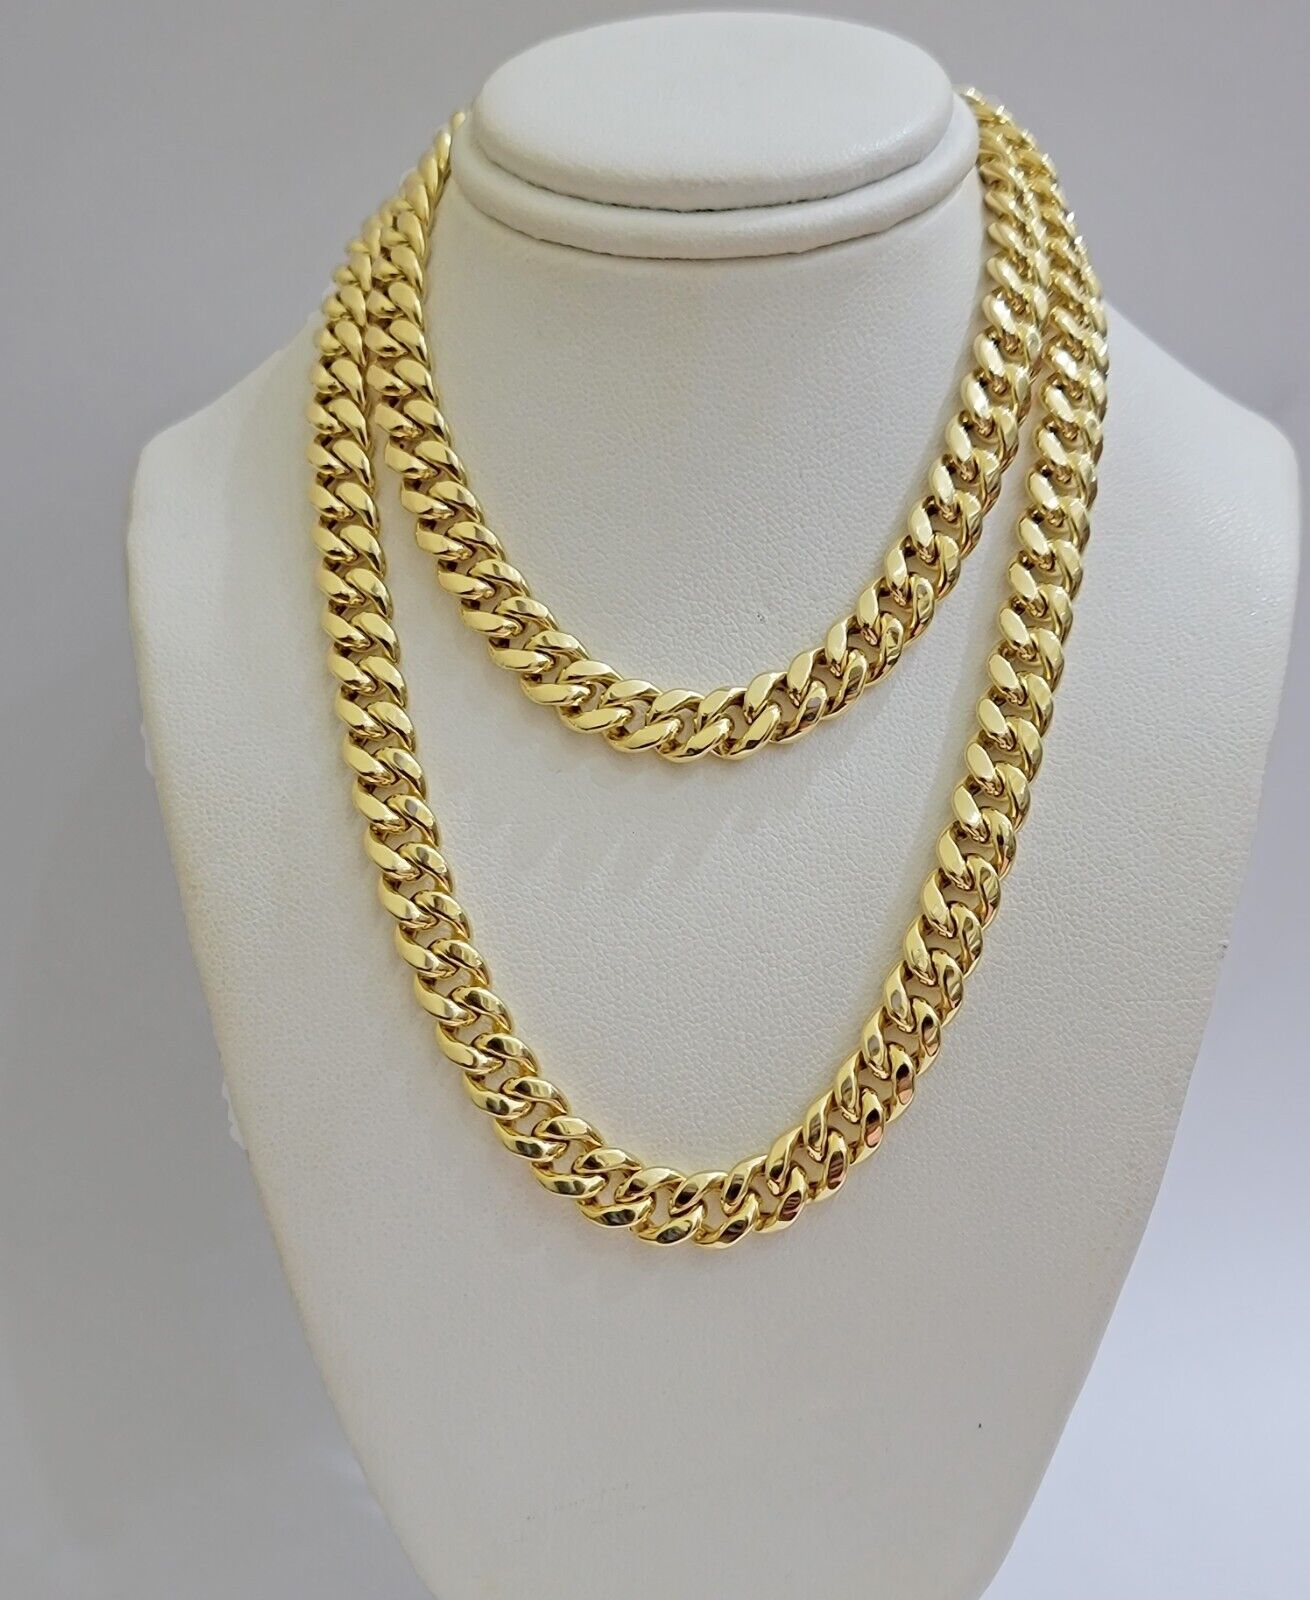 Men's Gold Chains | The Gold Gods